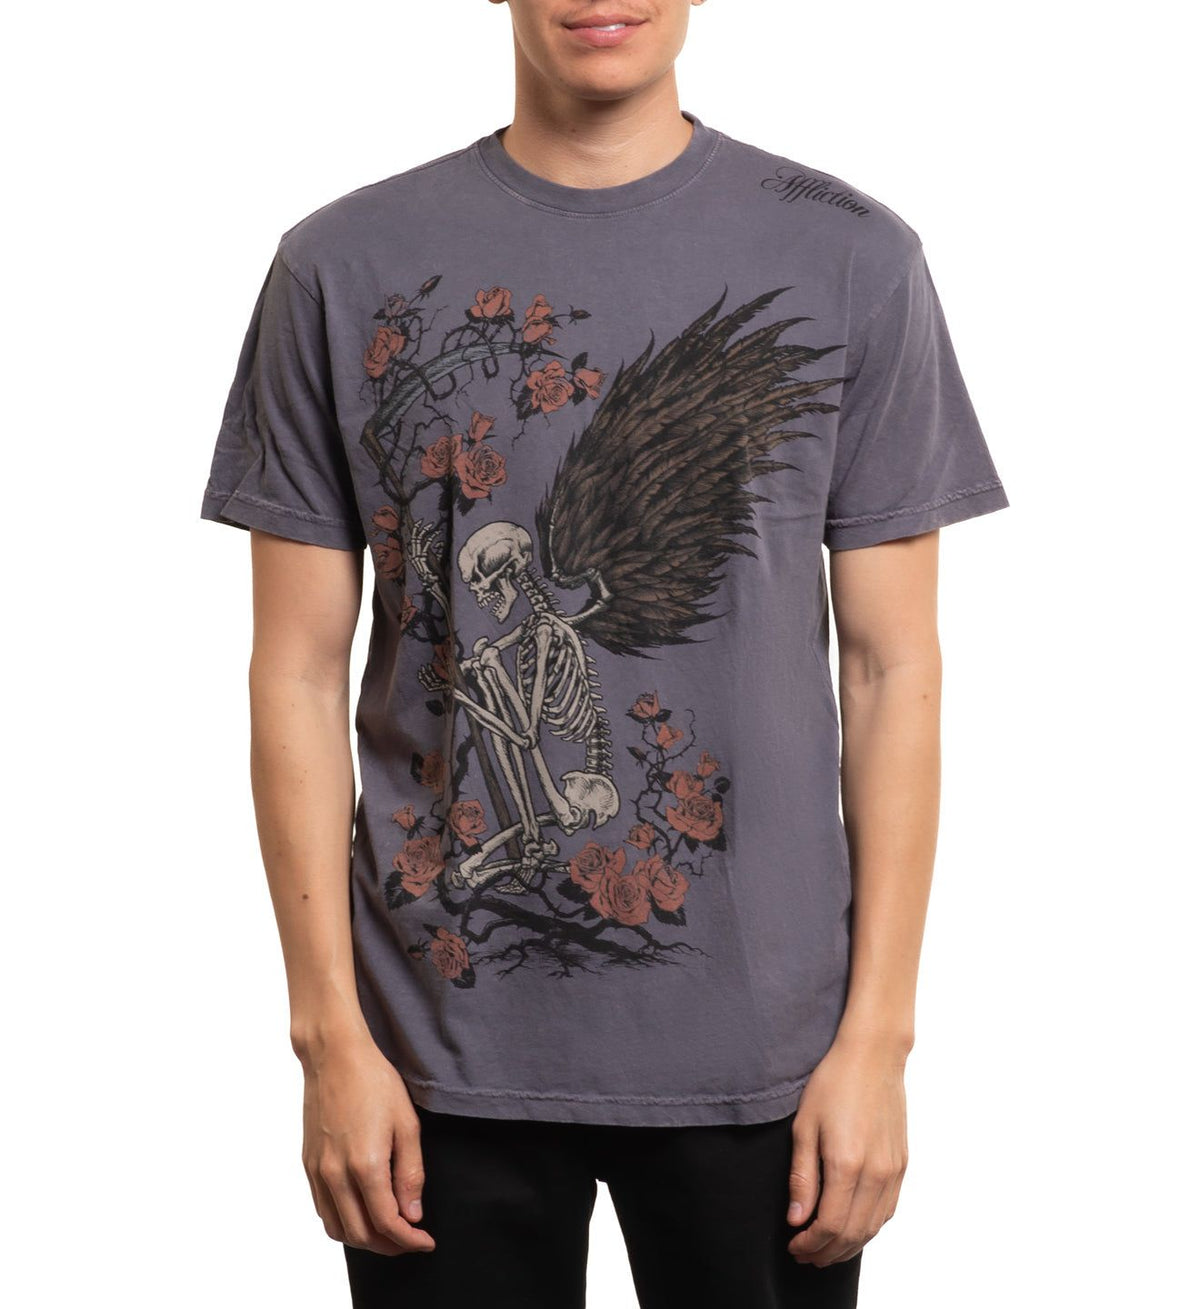 Winged Reaper - Affliction Clothing